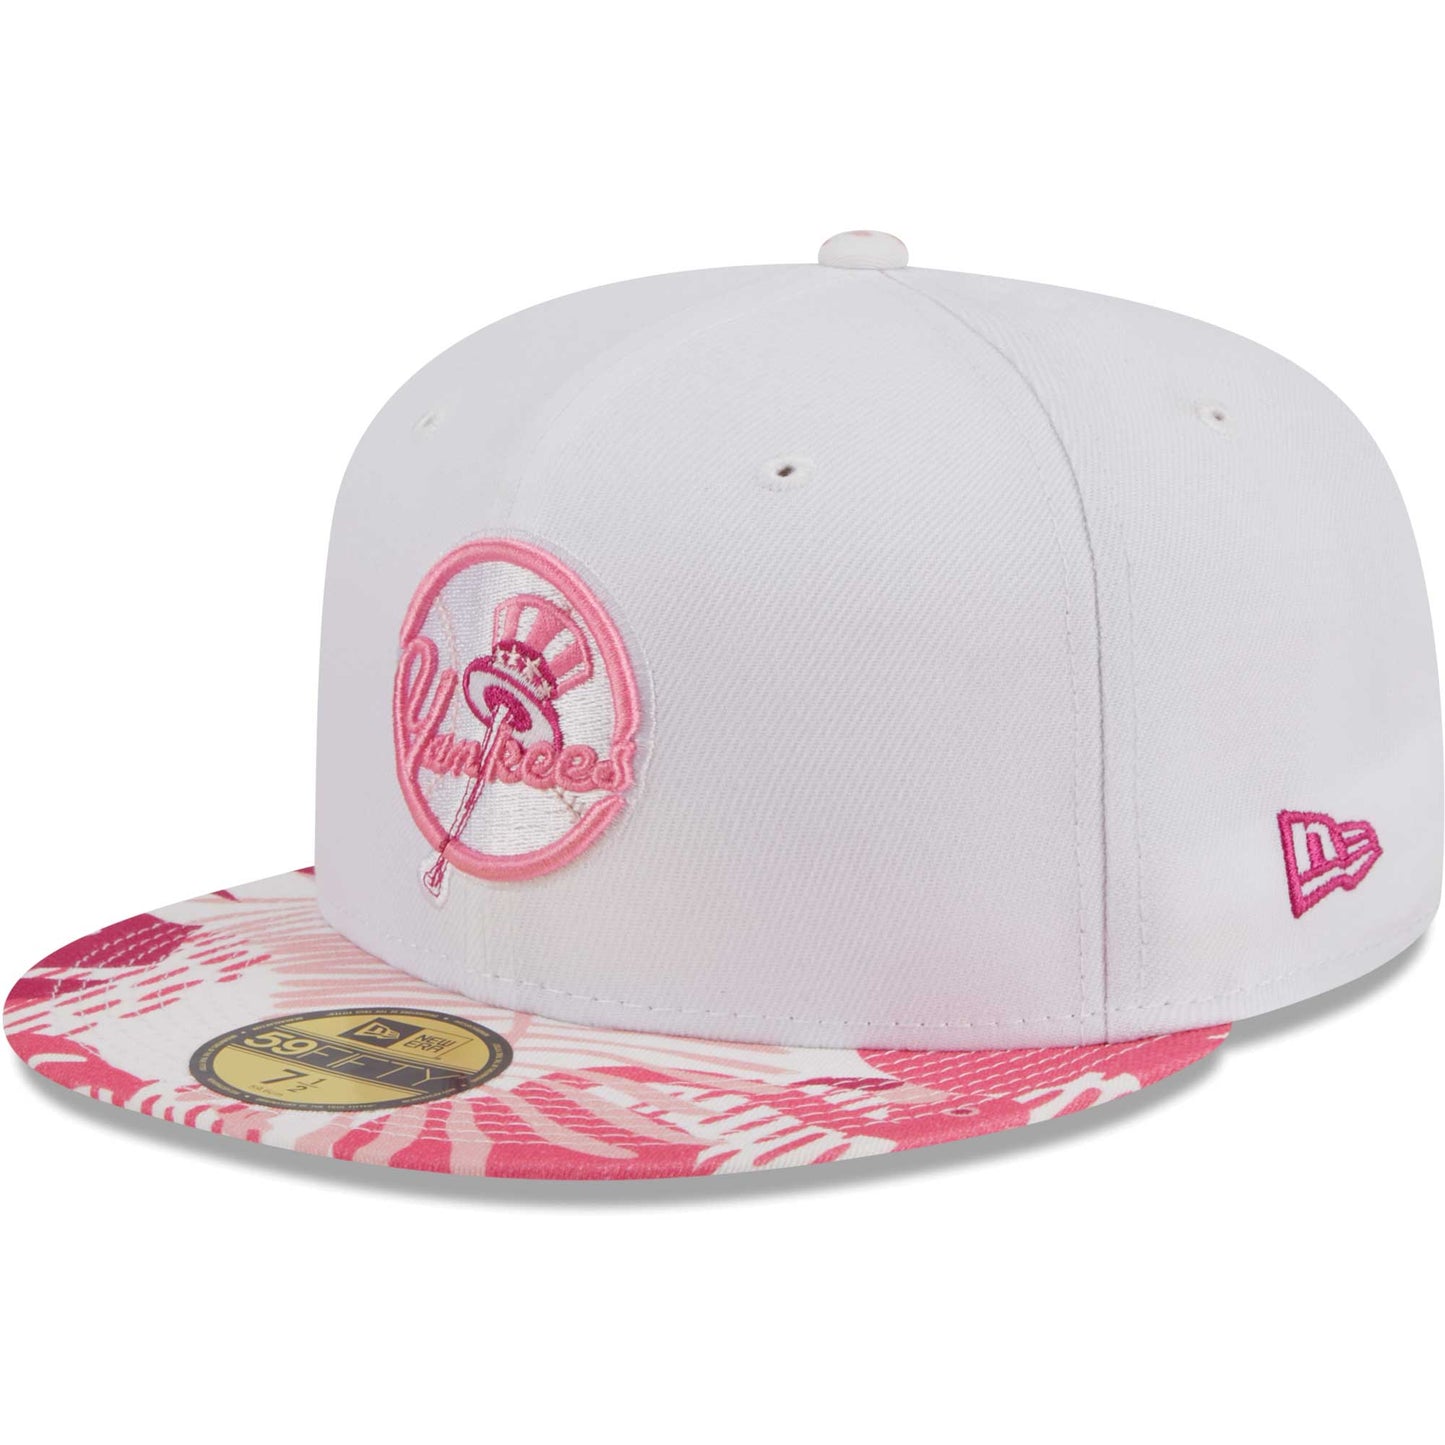 New York Yankees New Era Flamingo 59FIFTY Fitted Hat - White/Pink